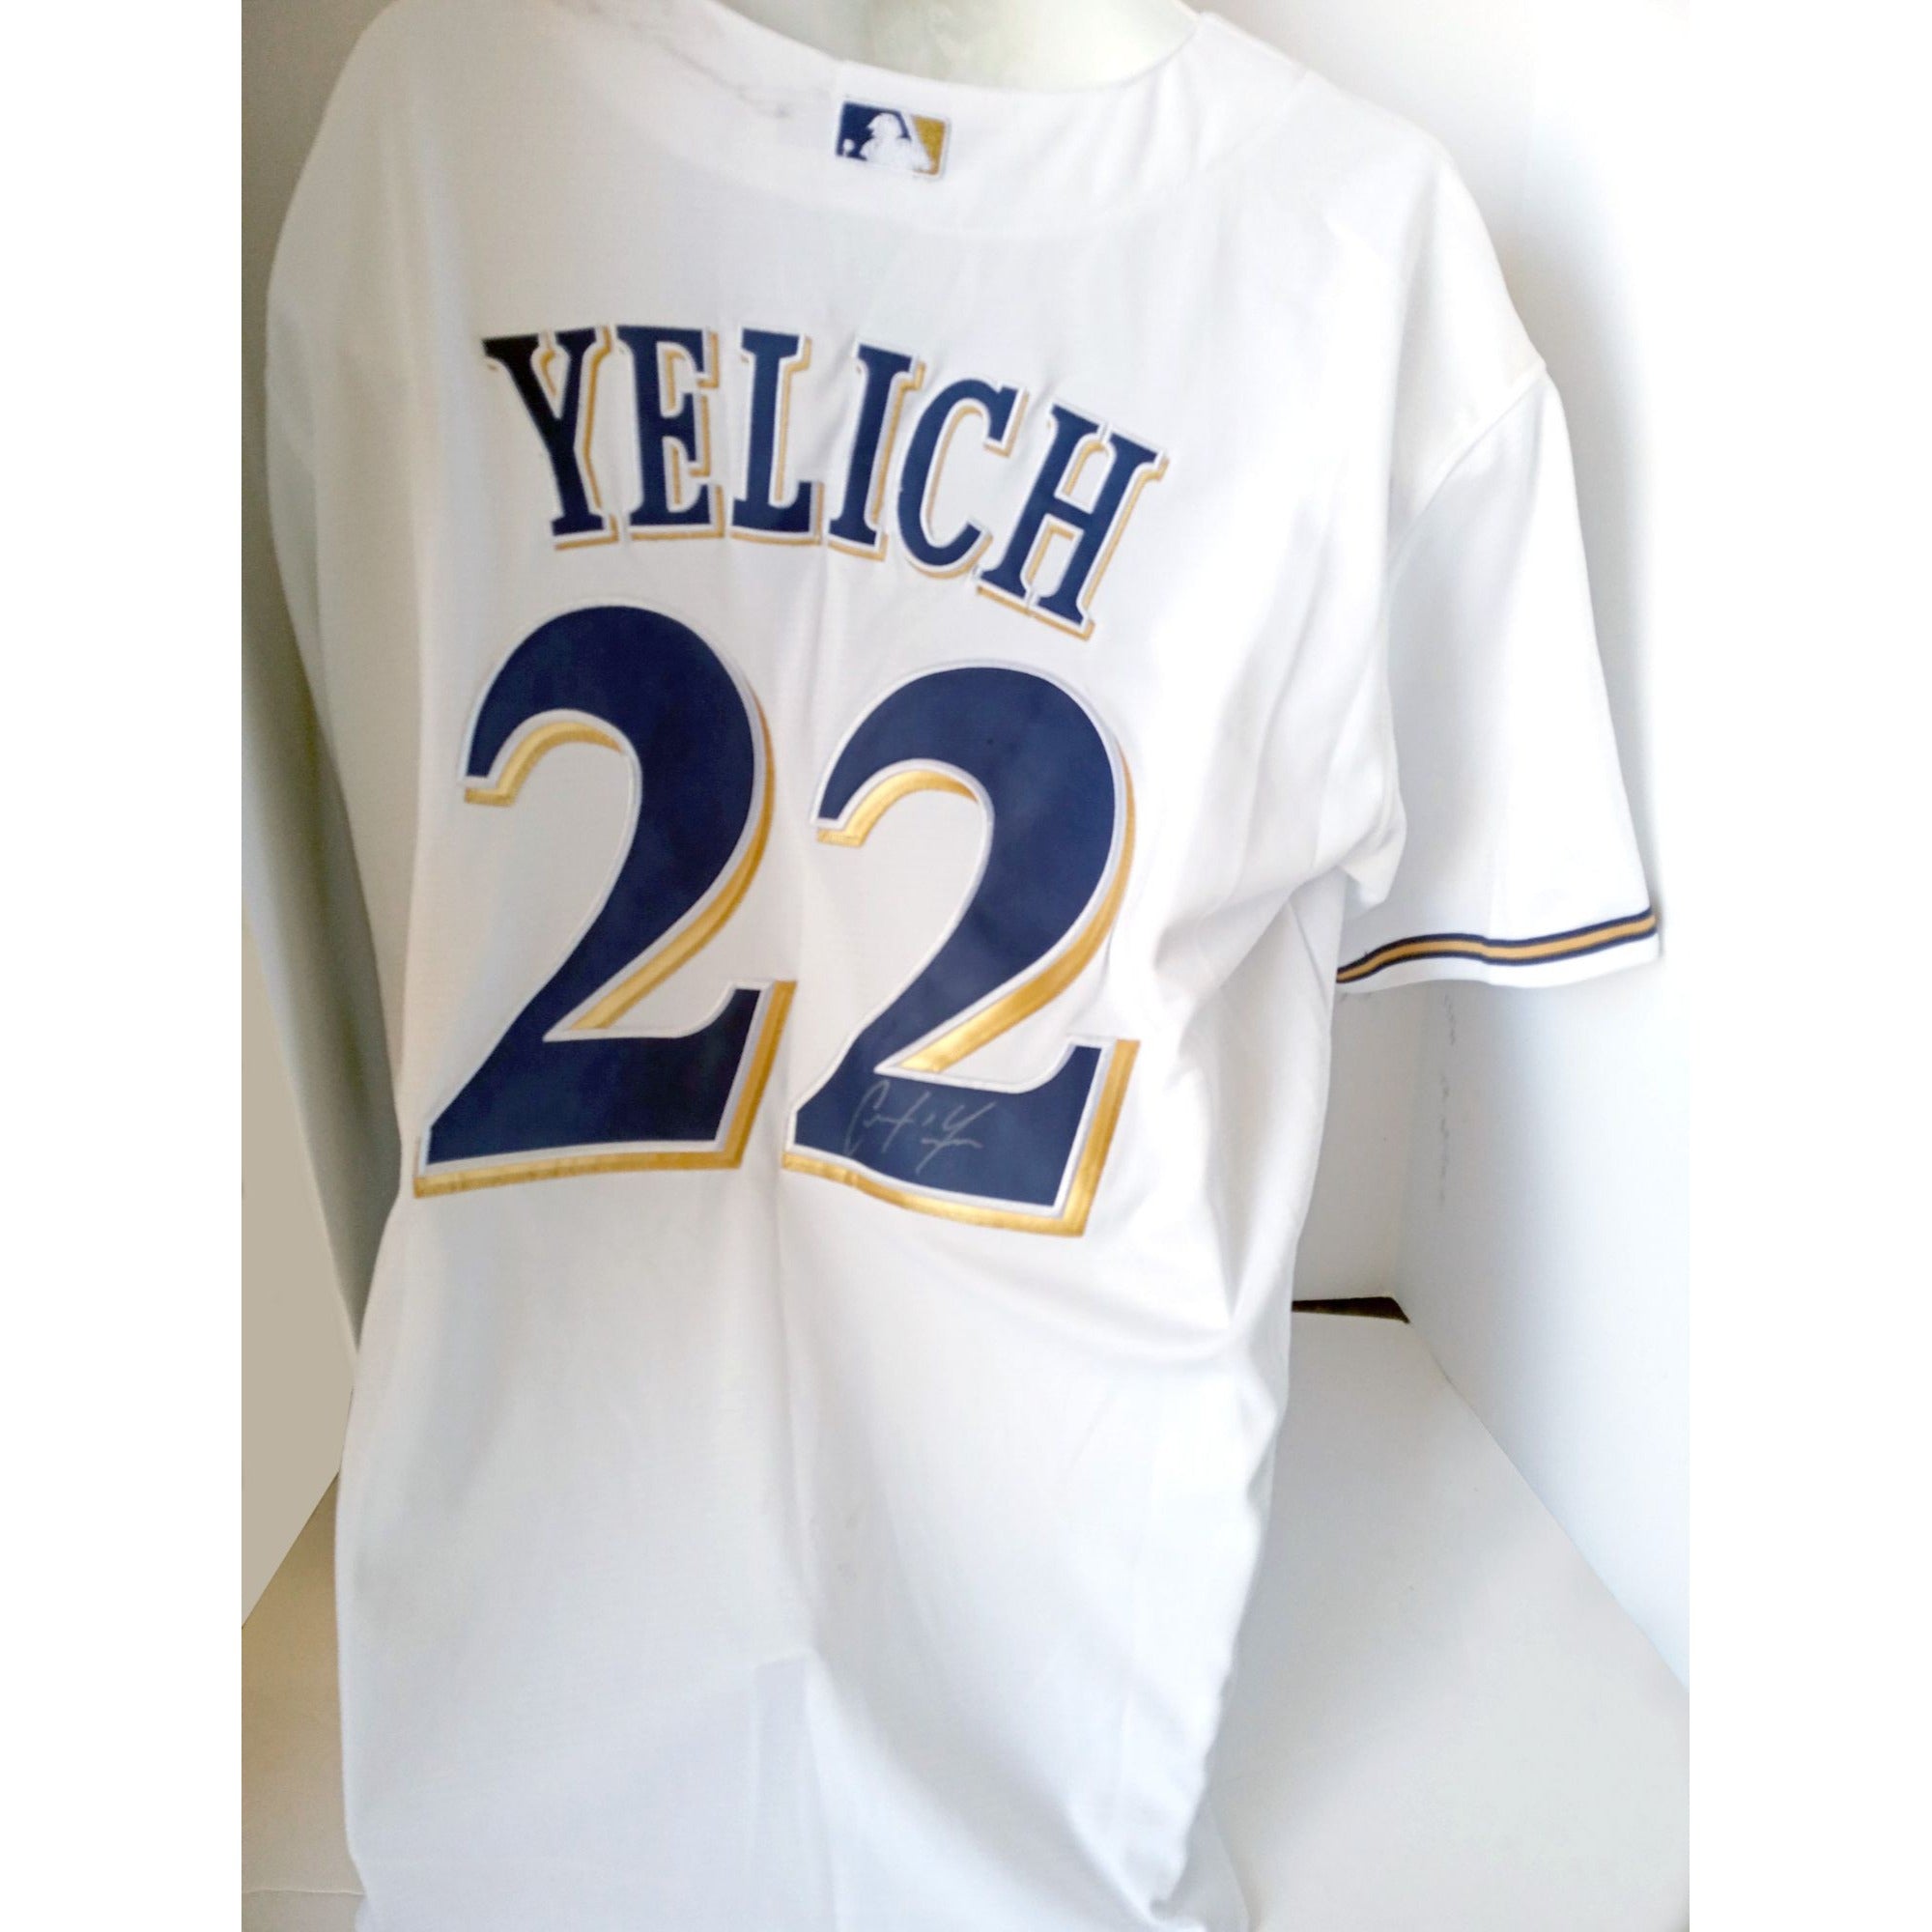 Christian Yelich Milwaukee Brewers size extra large jersey signed with proof